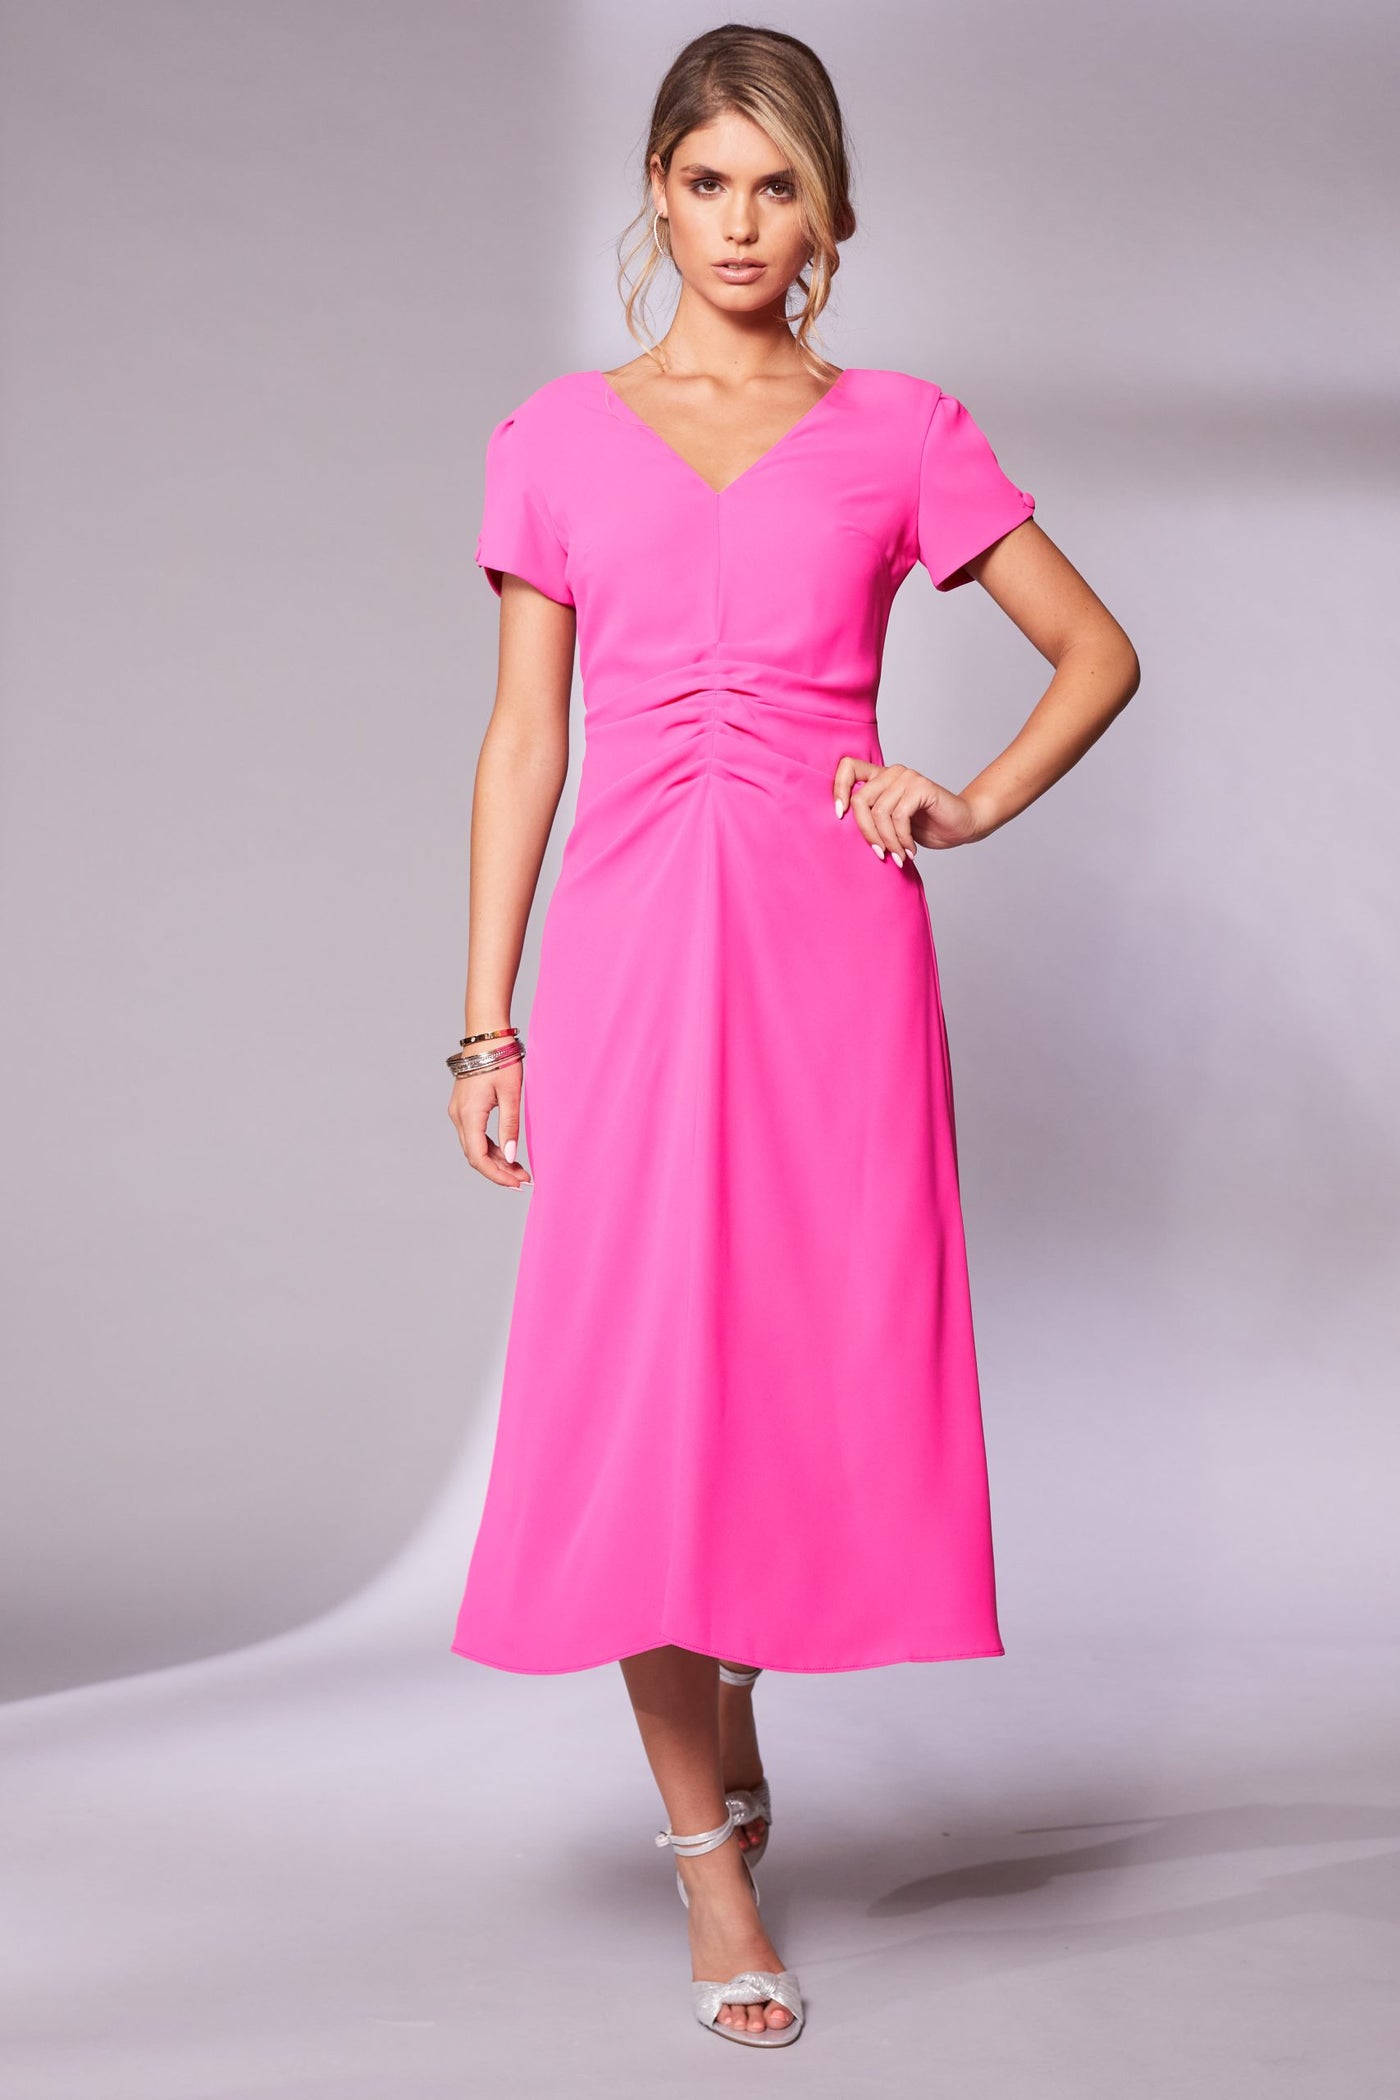 Hot Pink Dress With Ruching Mid Drift & Cut Out Shoulder